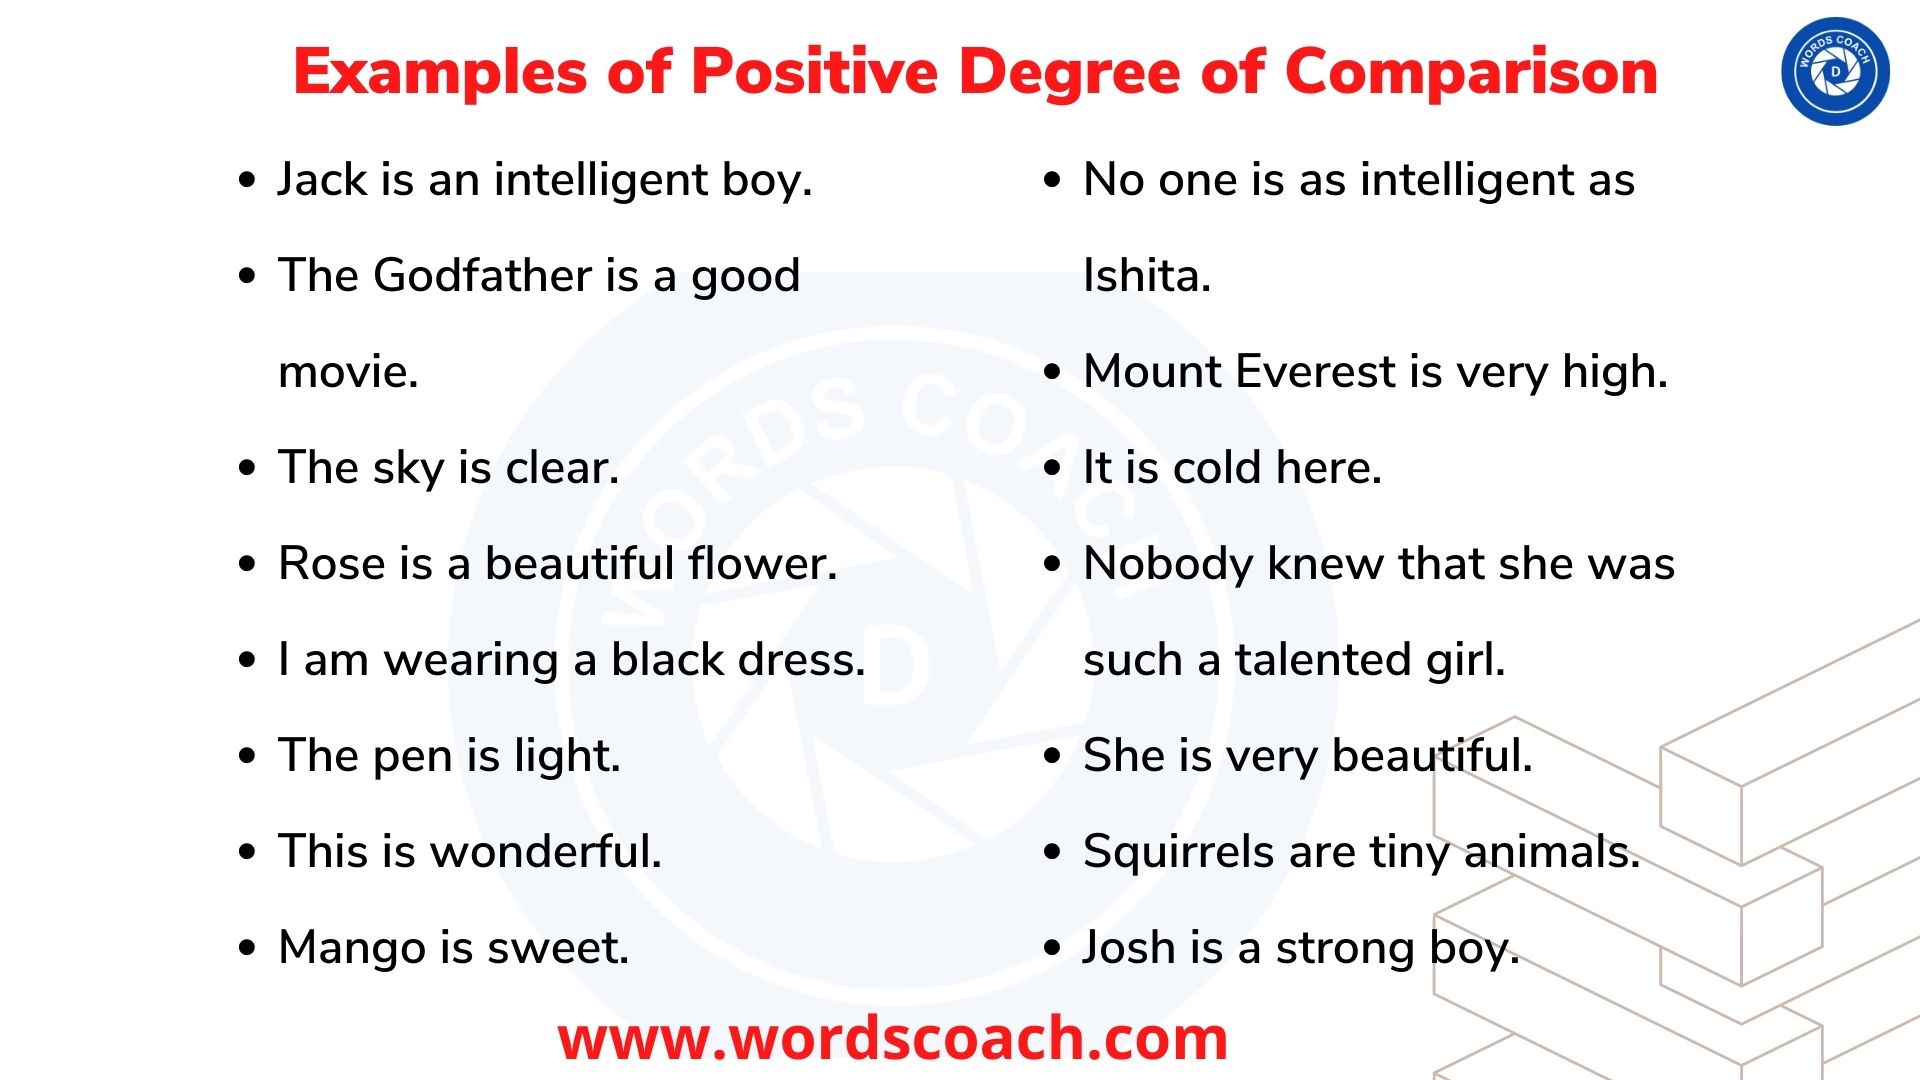 Examples of Positive Degree of Comparison - wordscoach.com